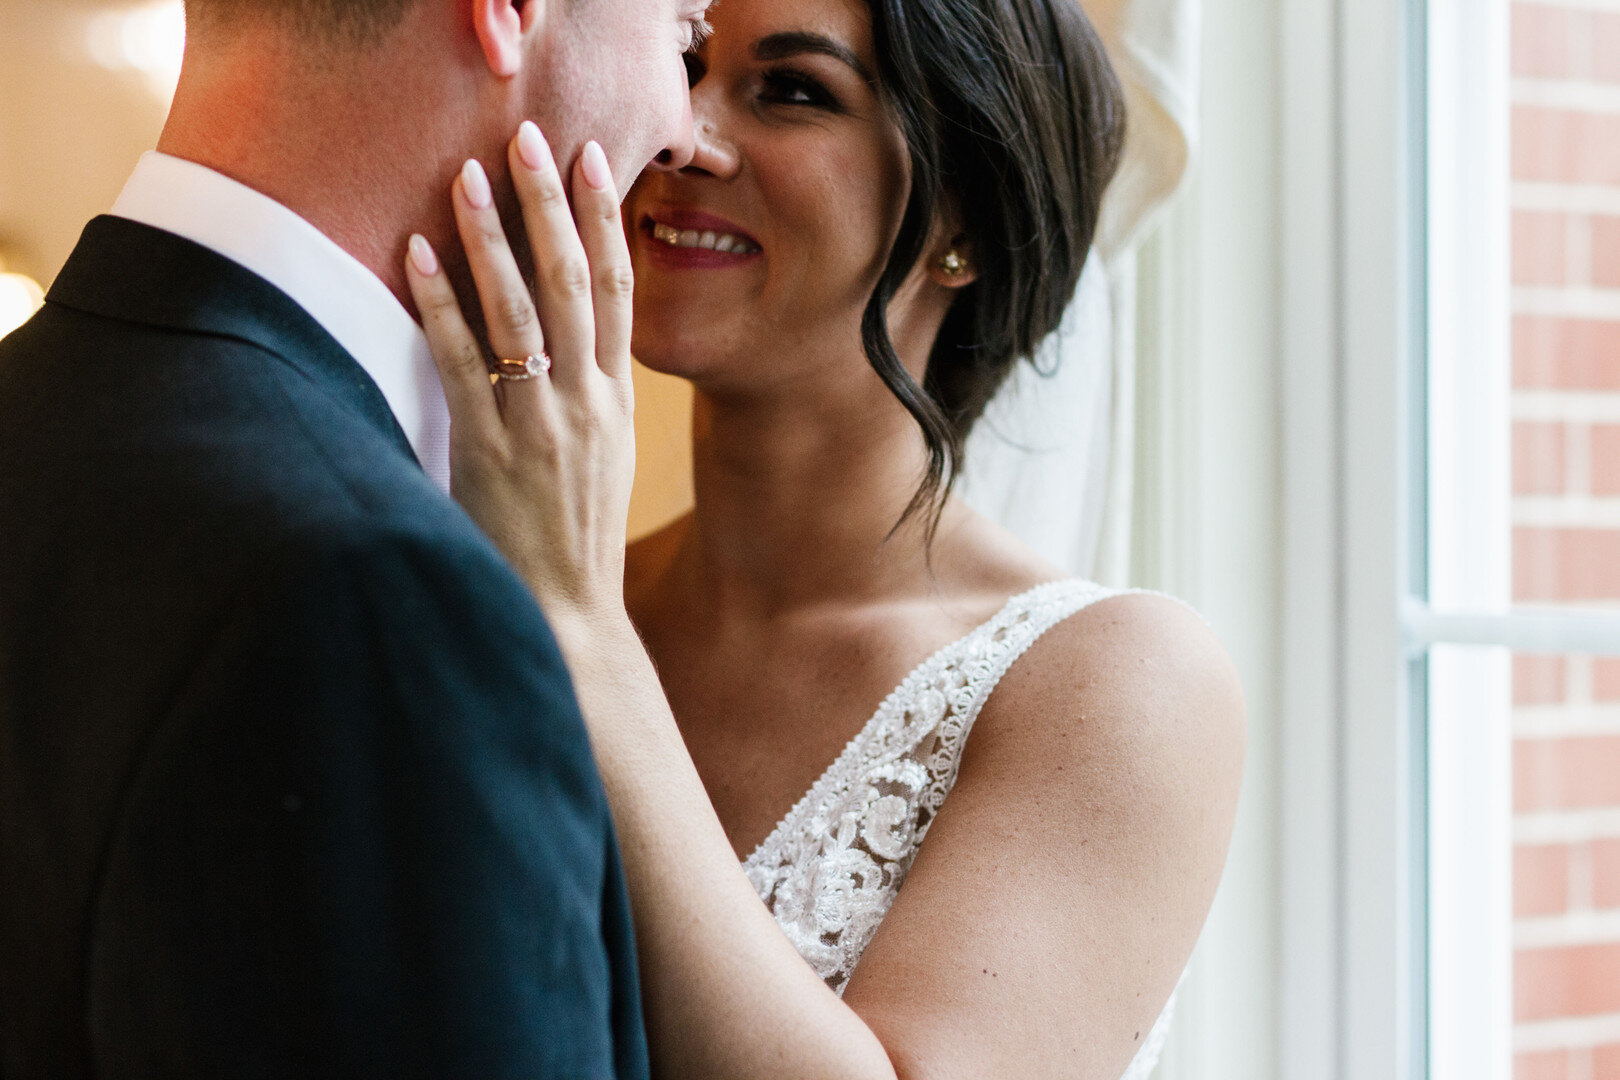 Chicago spring wedding captured by Hannah Rose Gray Photography. See more timeless wedding ideas on CHItheeWED.com!